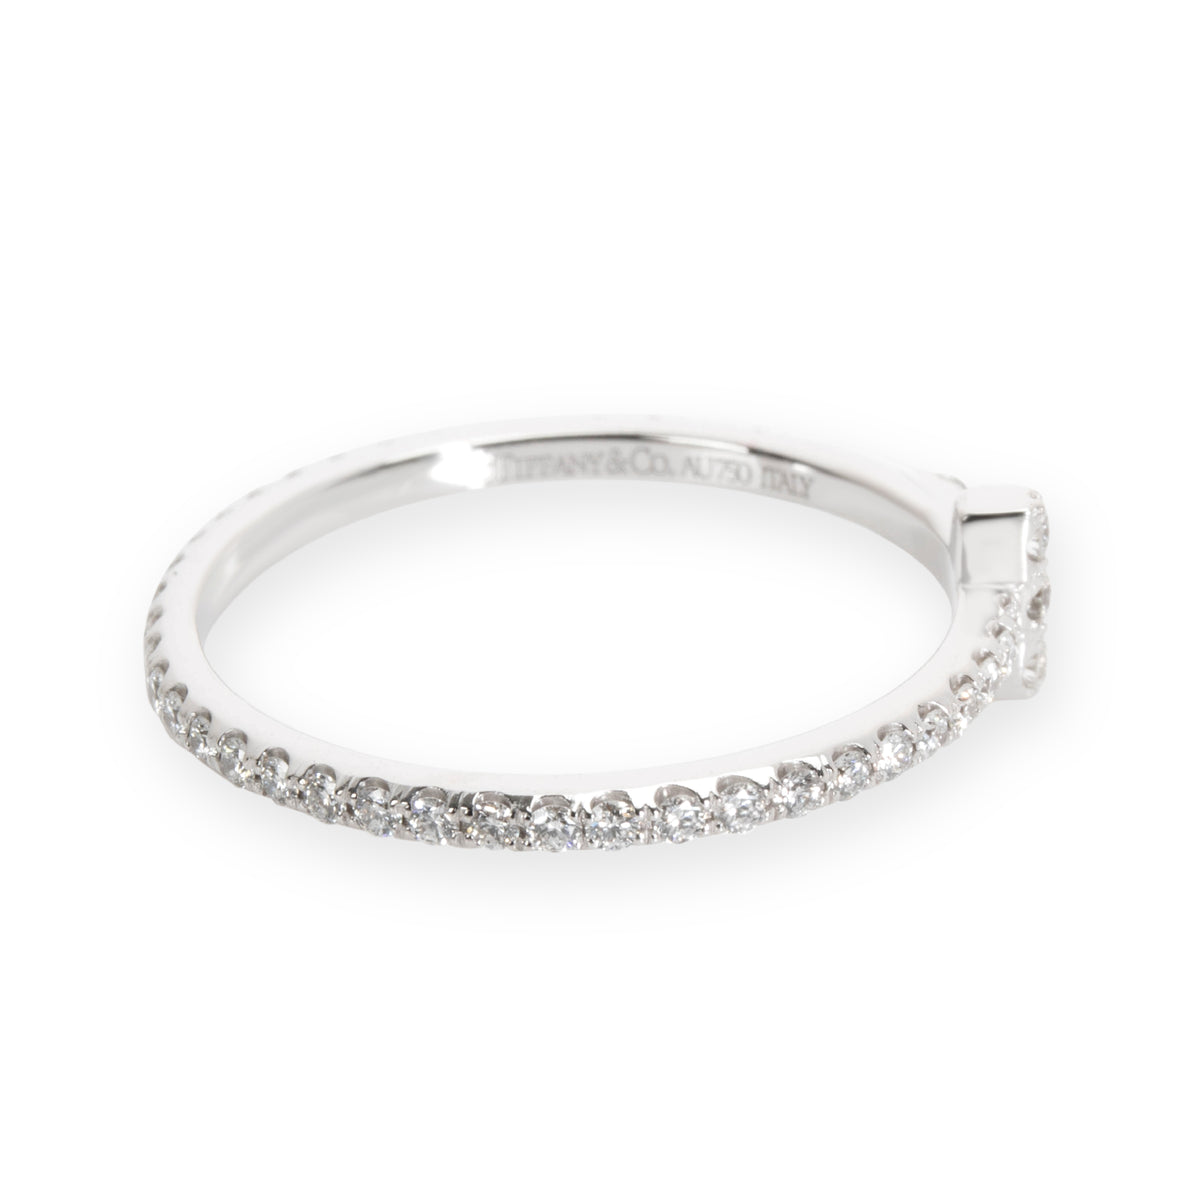 Tiffany & Co. T Diamond Eternity Ring in 18KT White Gold 0.25 CTW